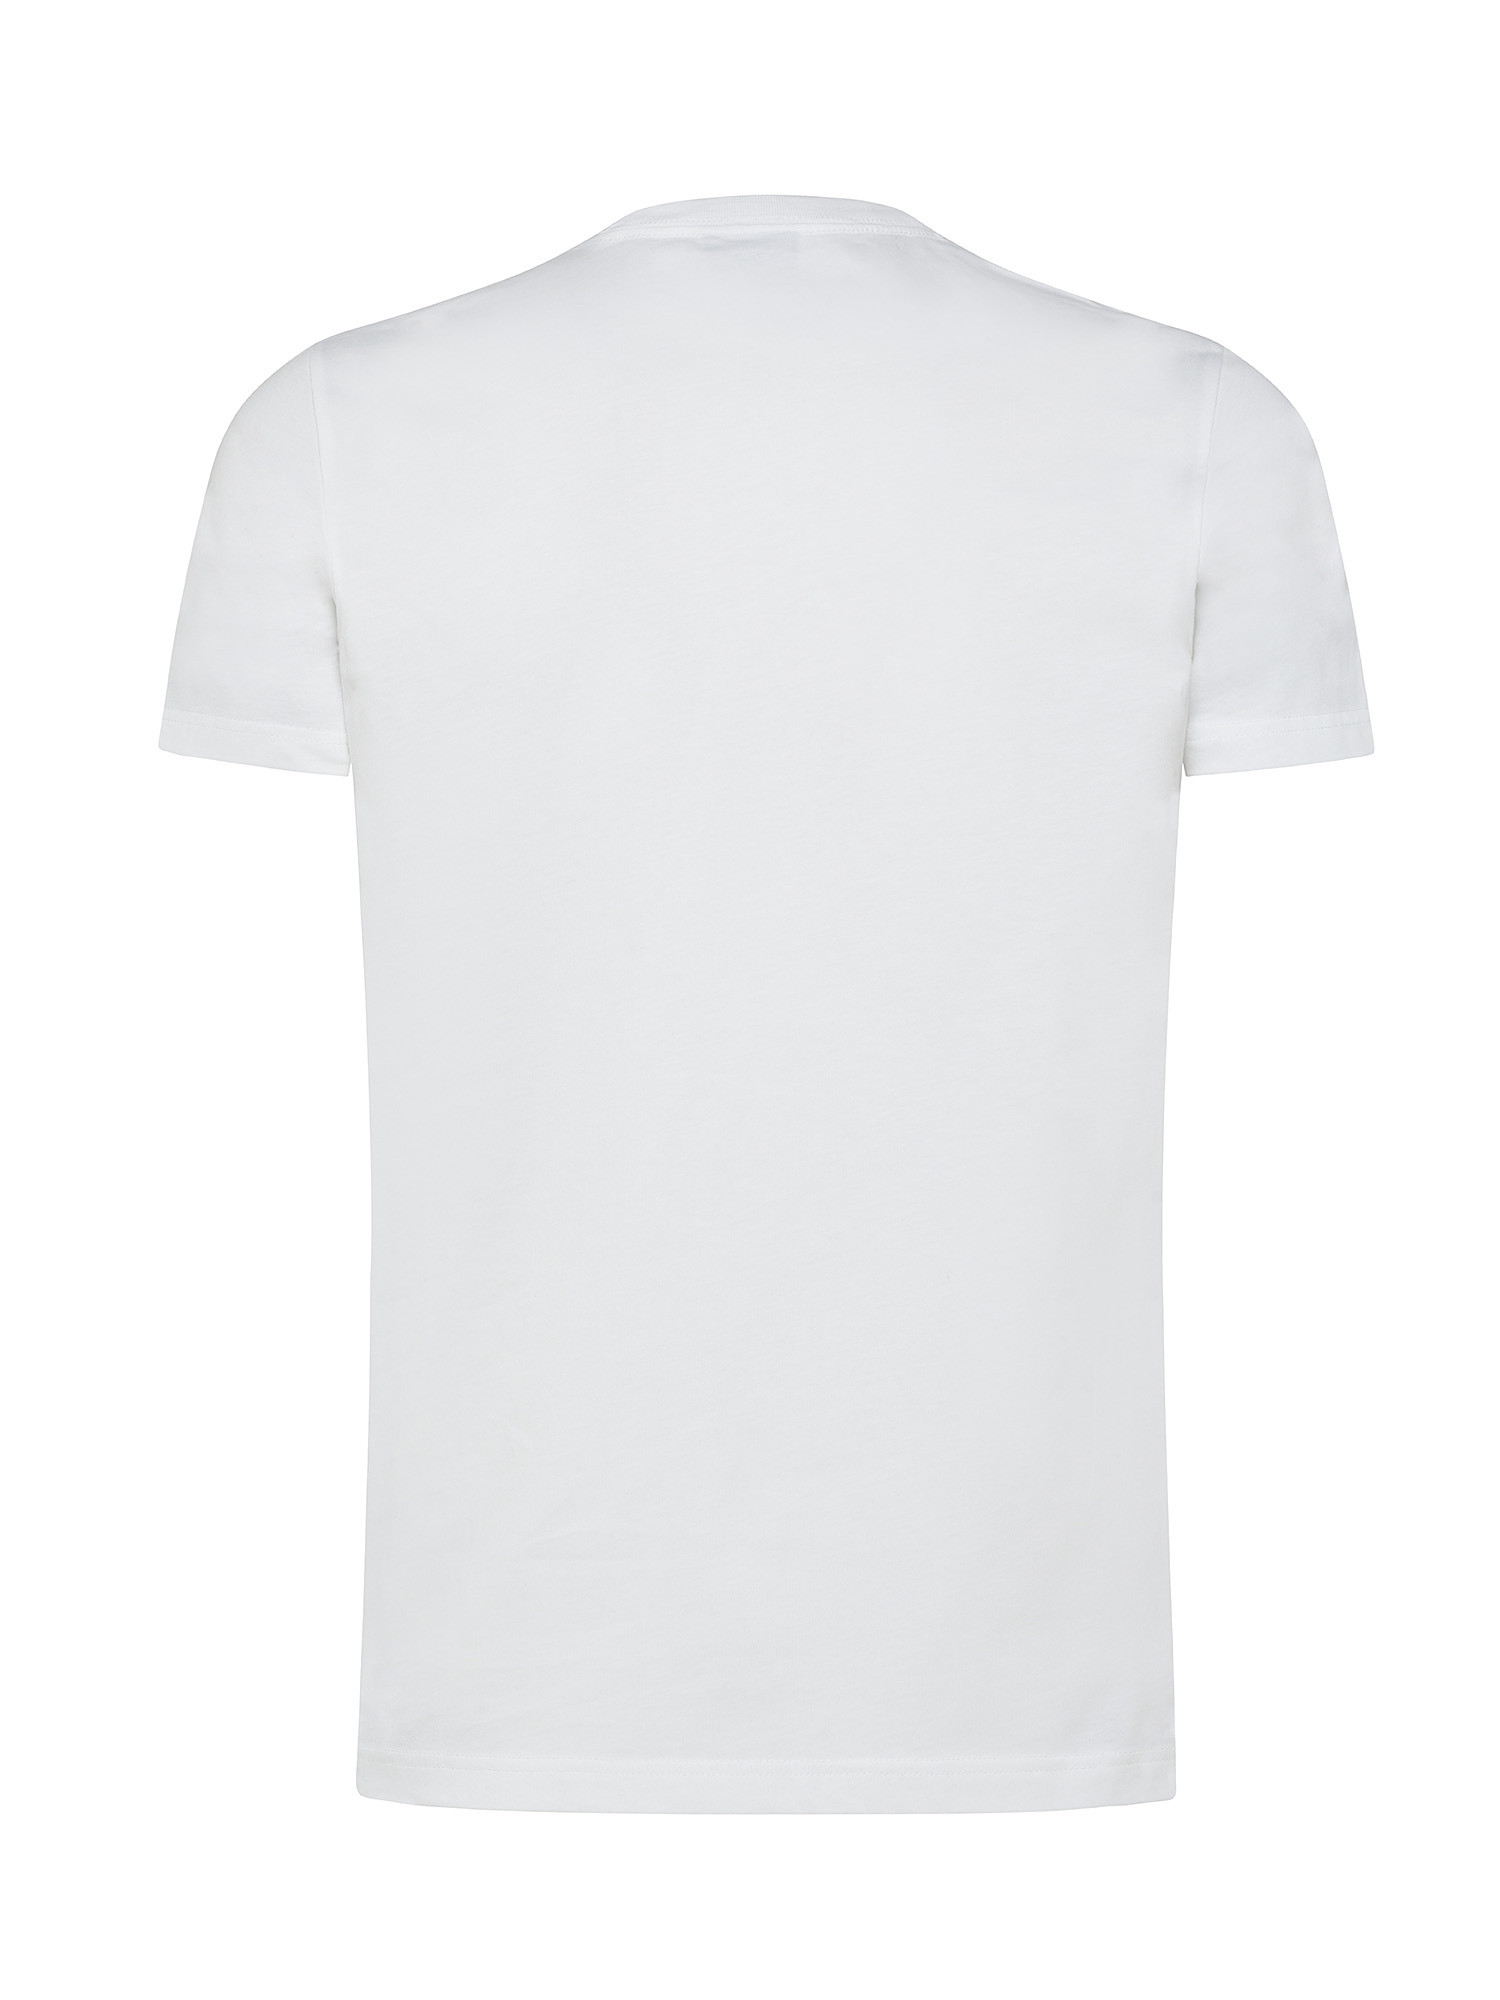 Paul Smith - T-shirt in cotone slim fit con stampa pennellate, Bianco, large image number 1